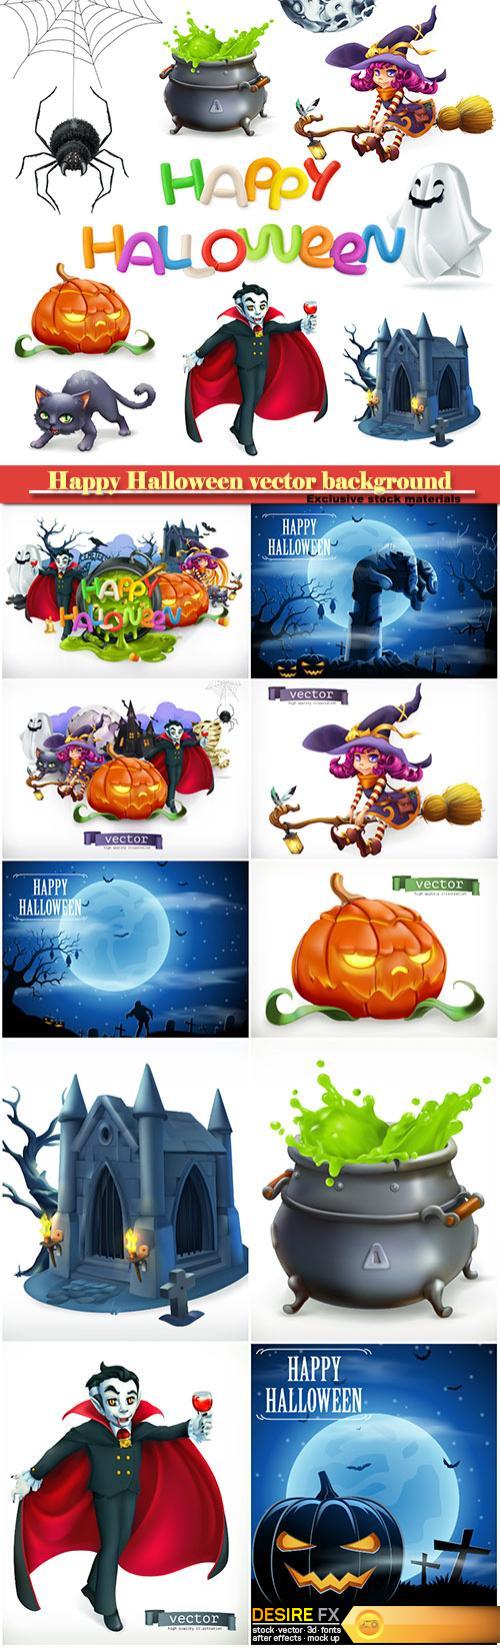 Happy Halloween vector background, pumpkin, spider, cat, witch, vampire, crypt and lettering, 3d vector icon set